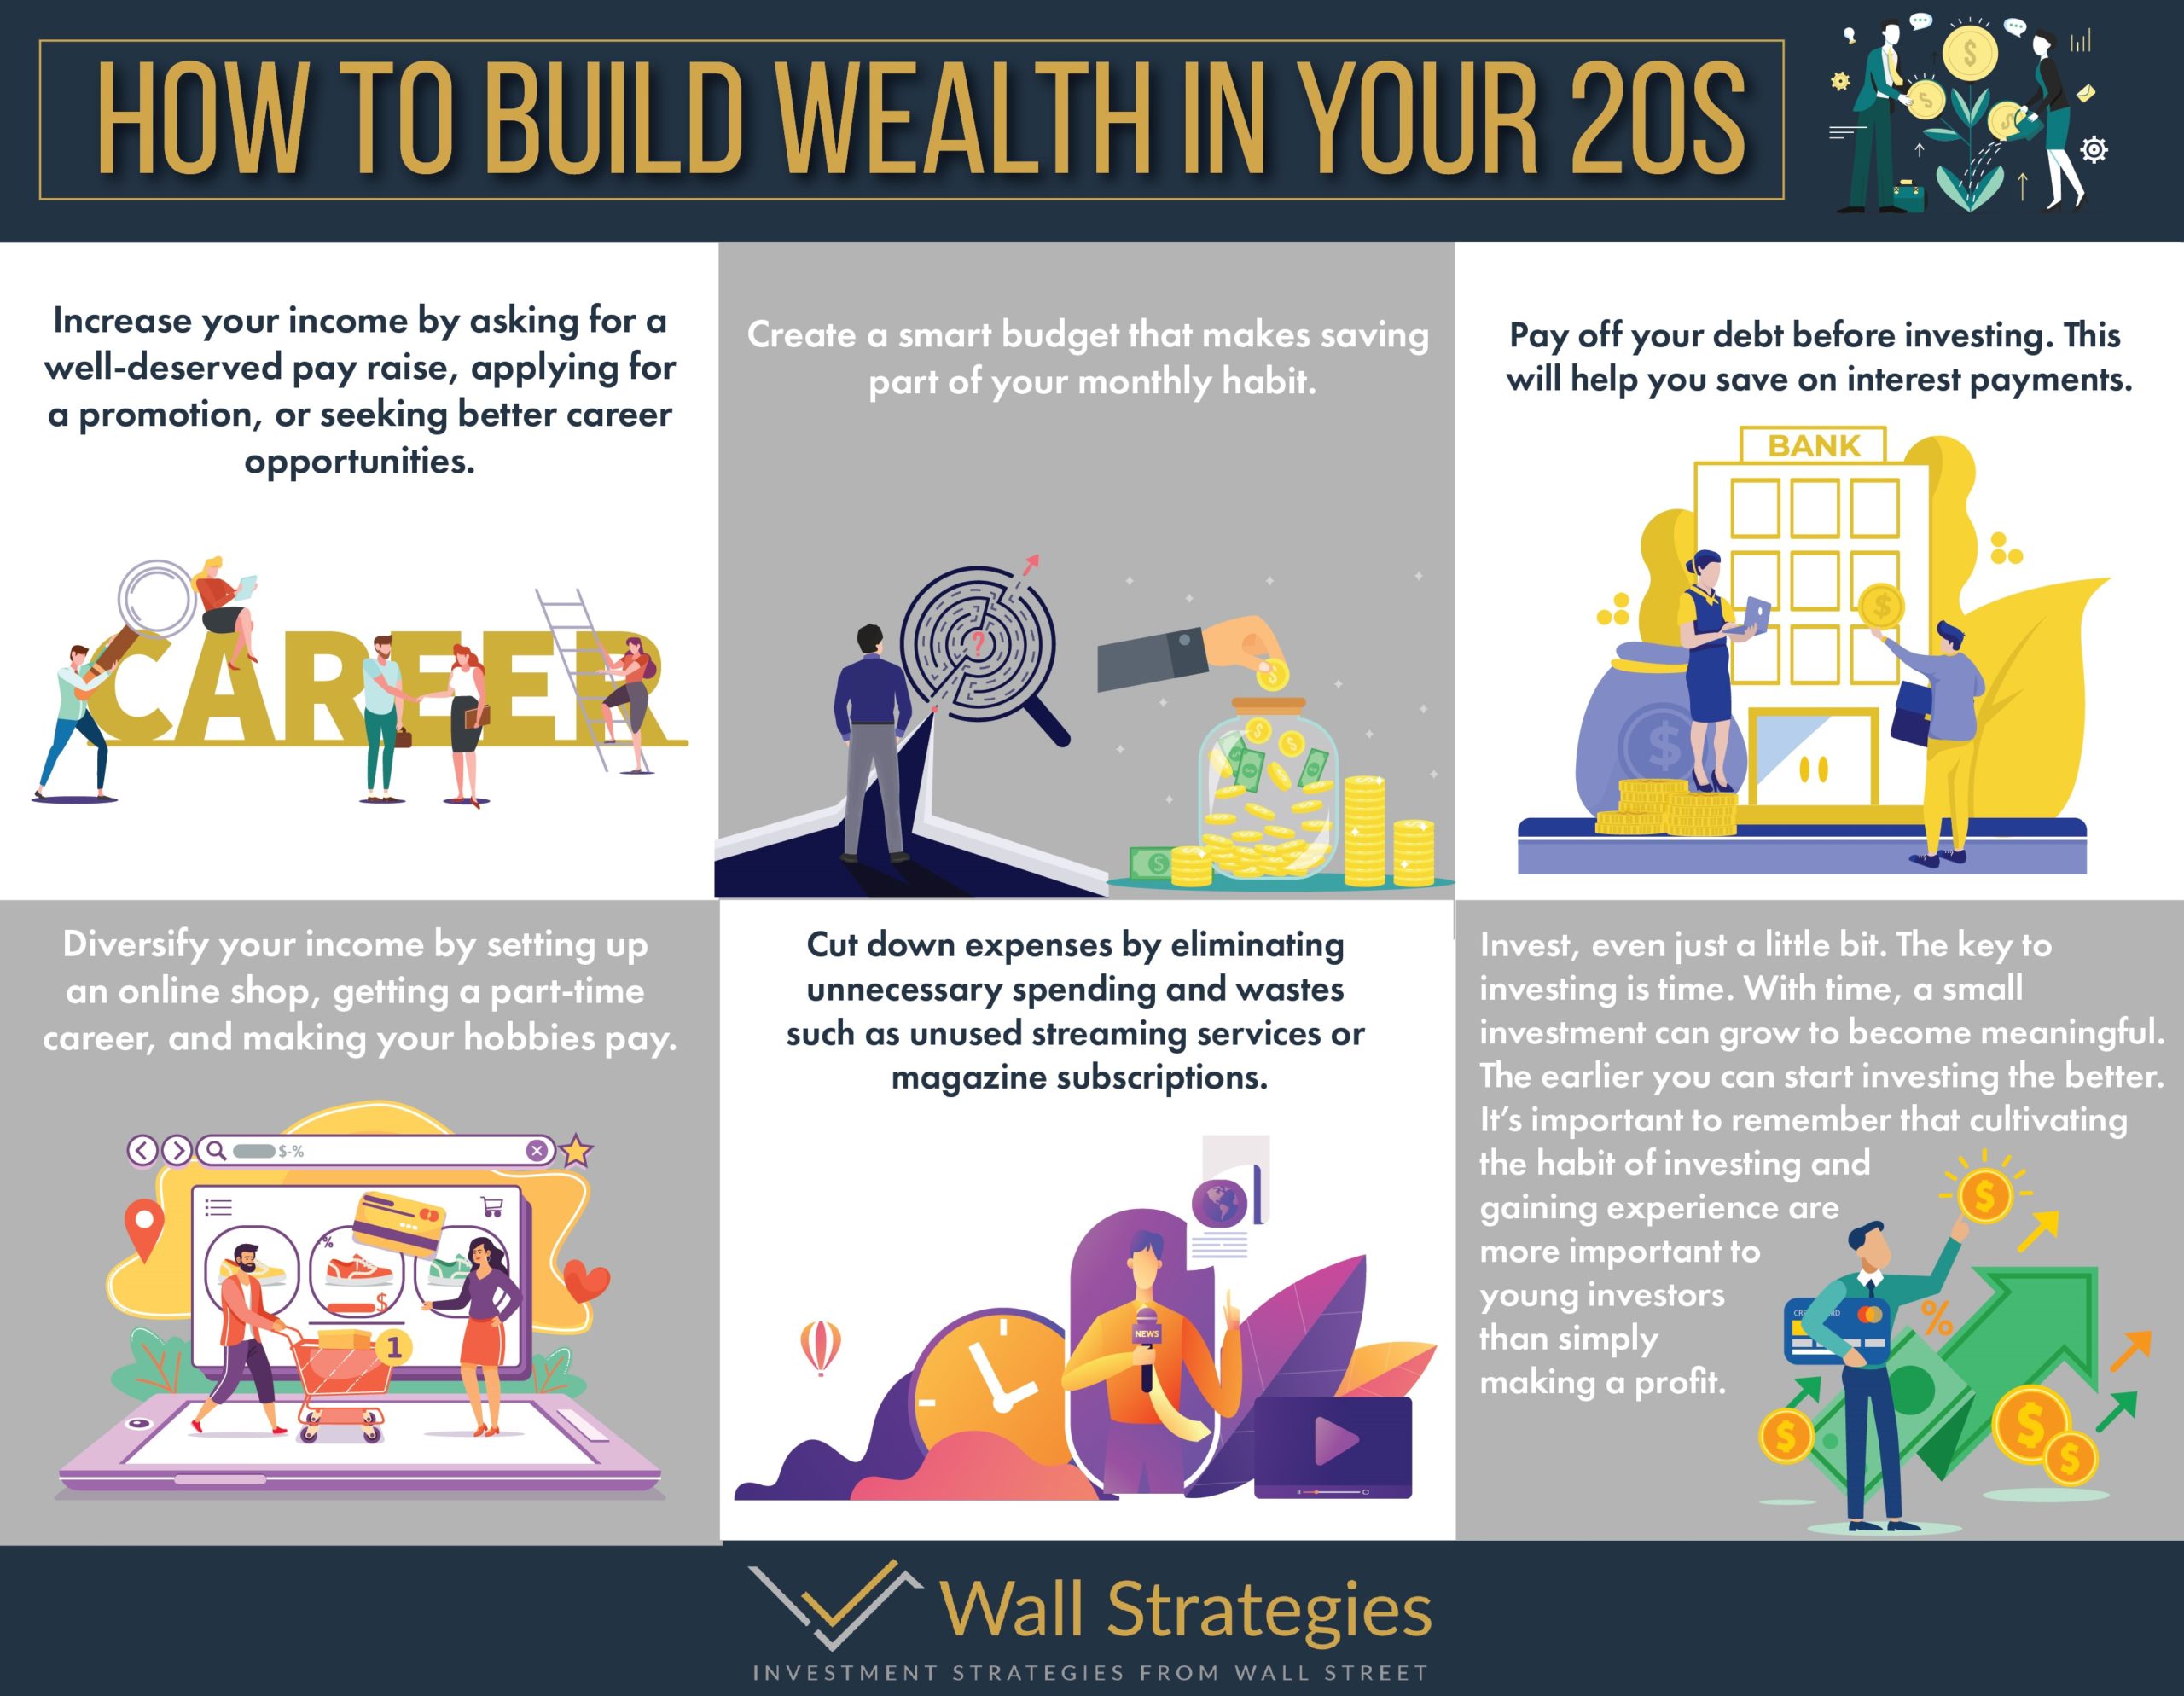 How to Build Wealth? Wall Strategies